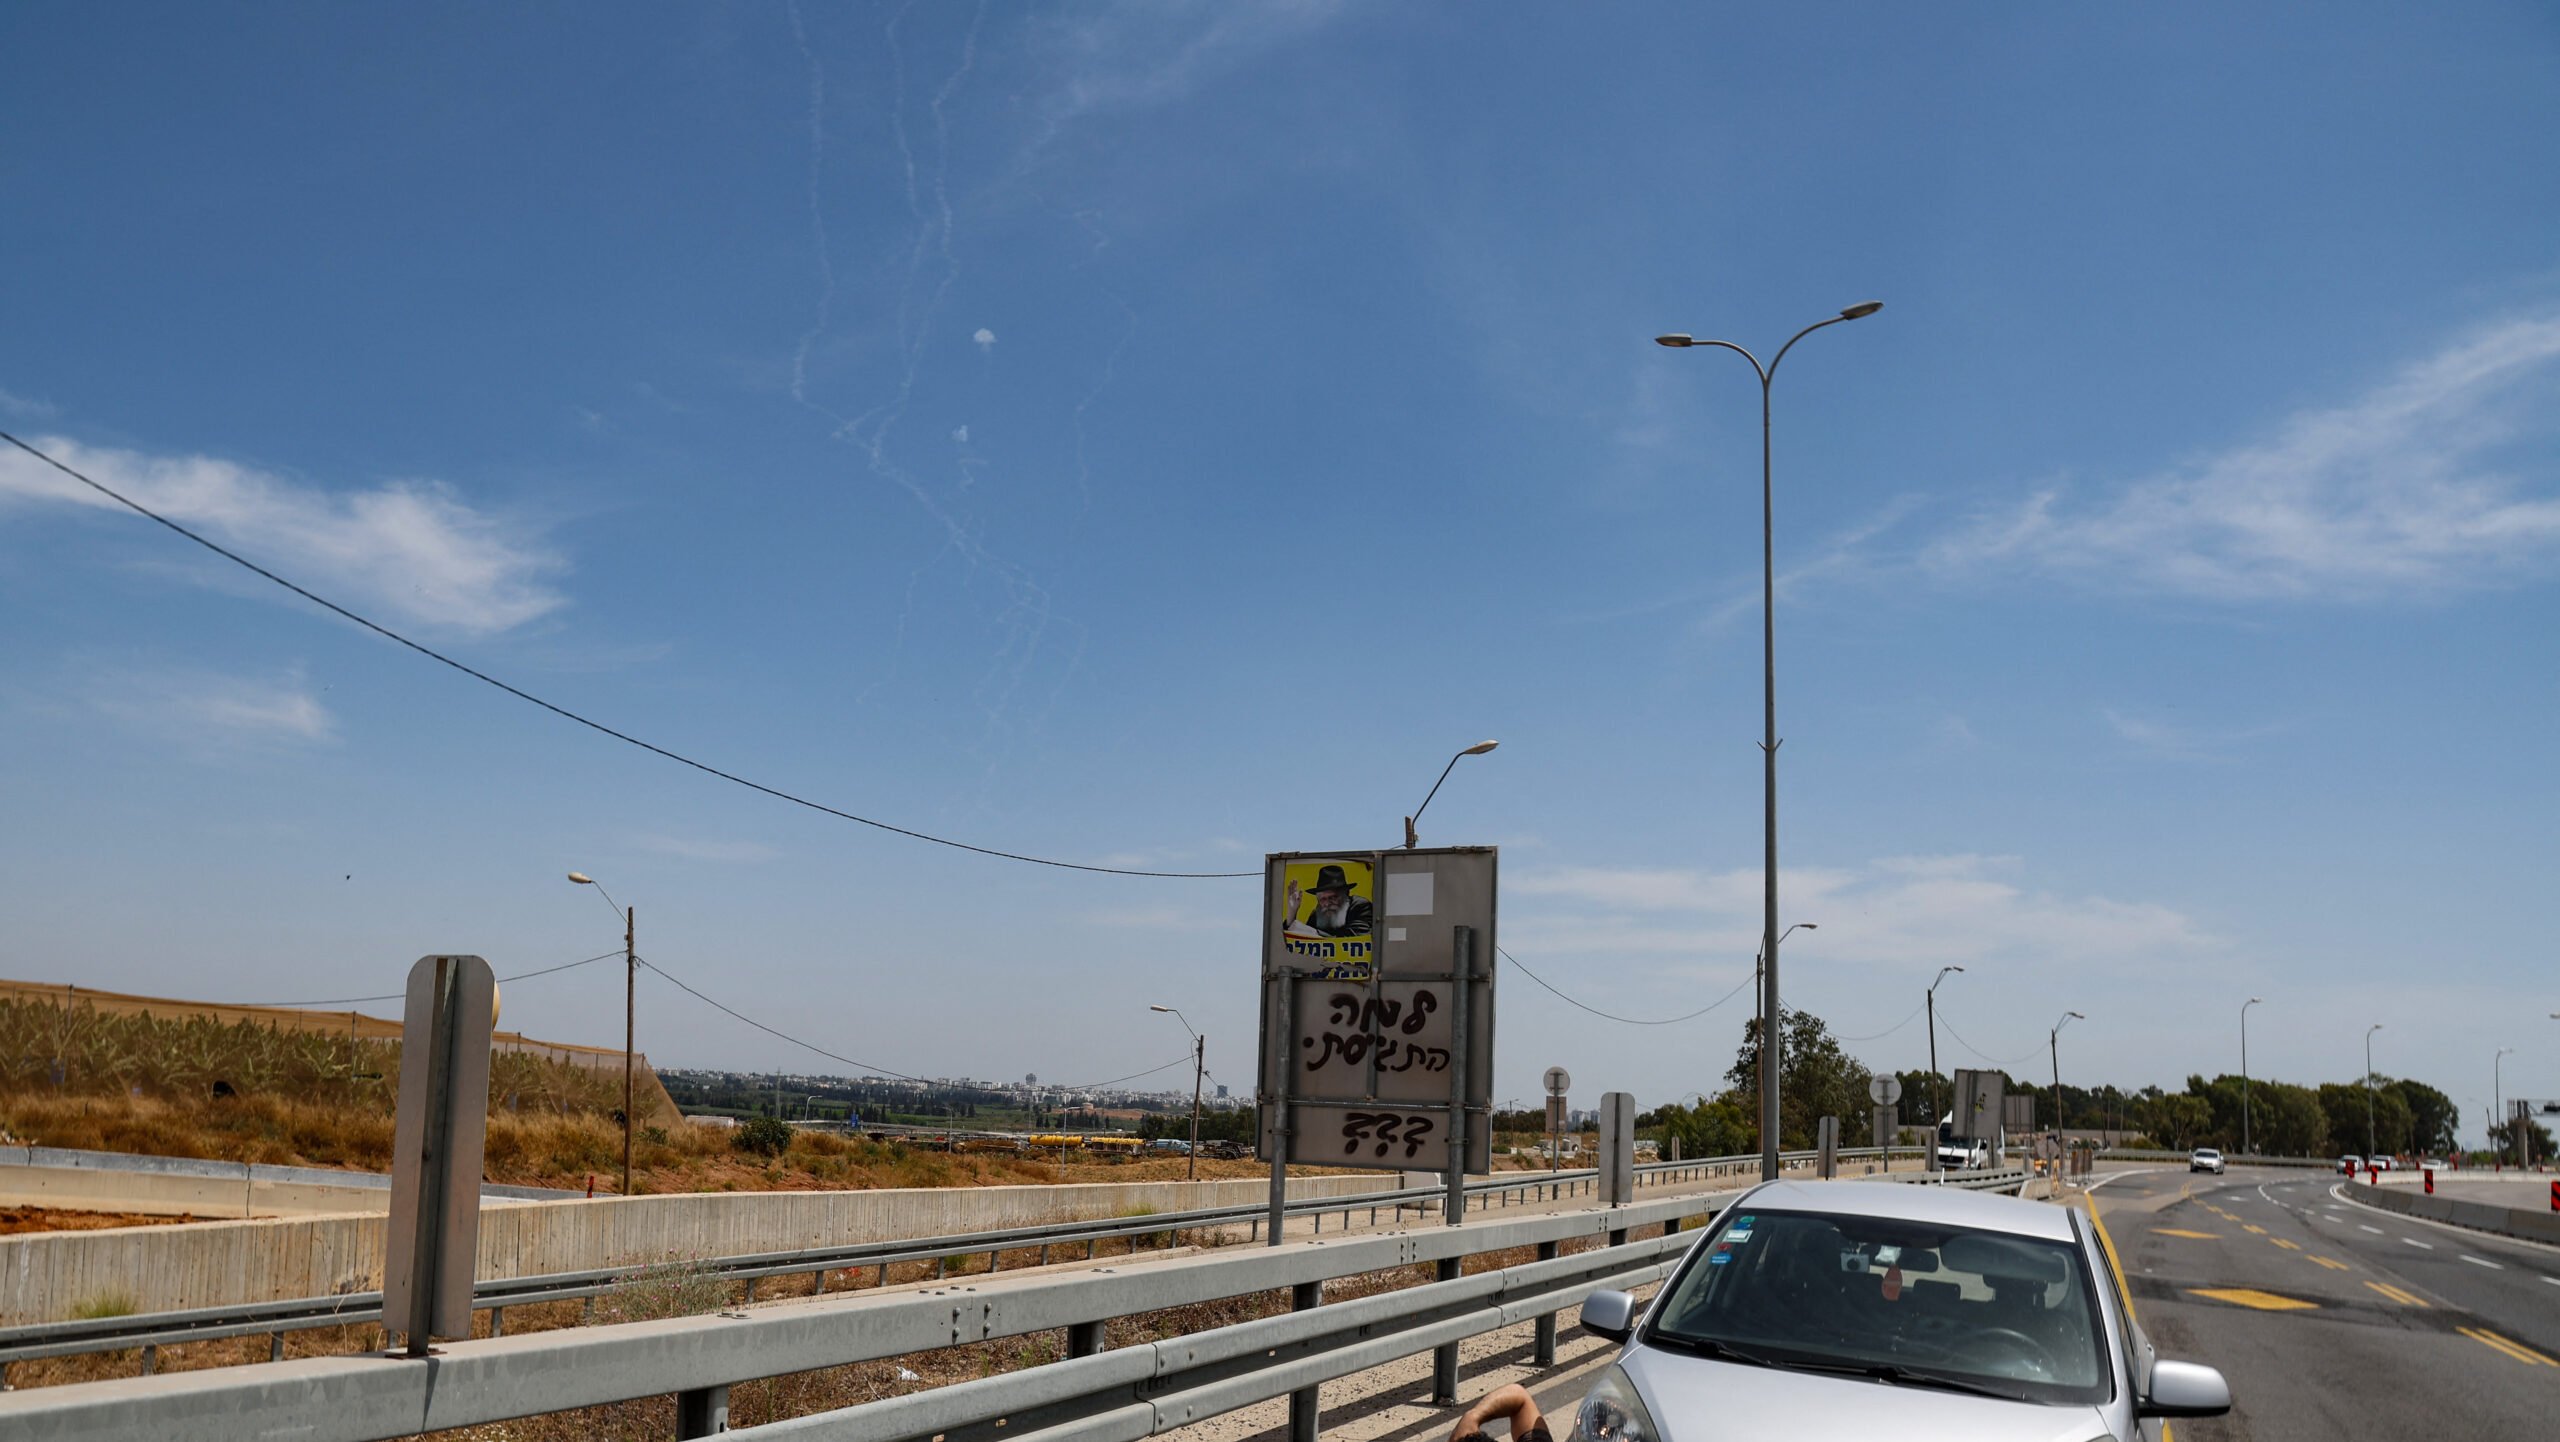 Hamas’ Rocket Barrage on Center To Prevent IDF From Seizing Weapons, Expert Tells TML